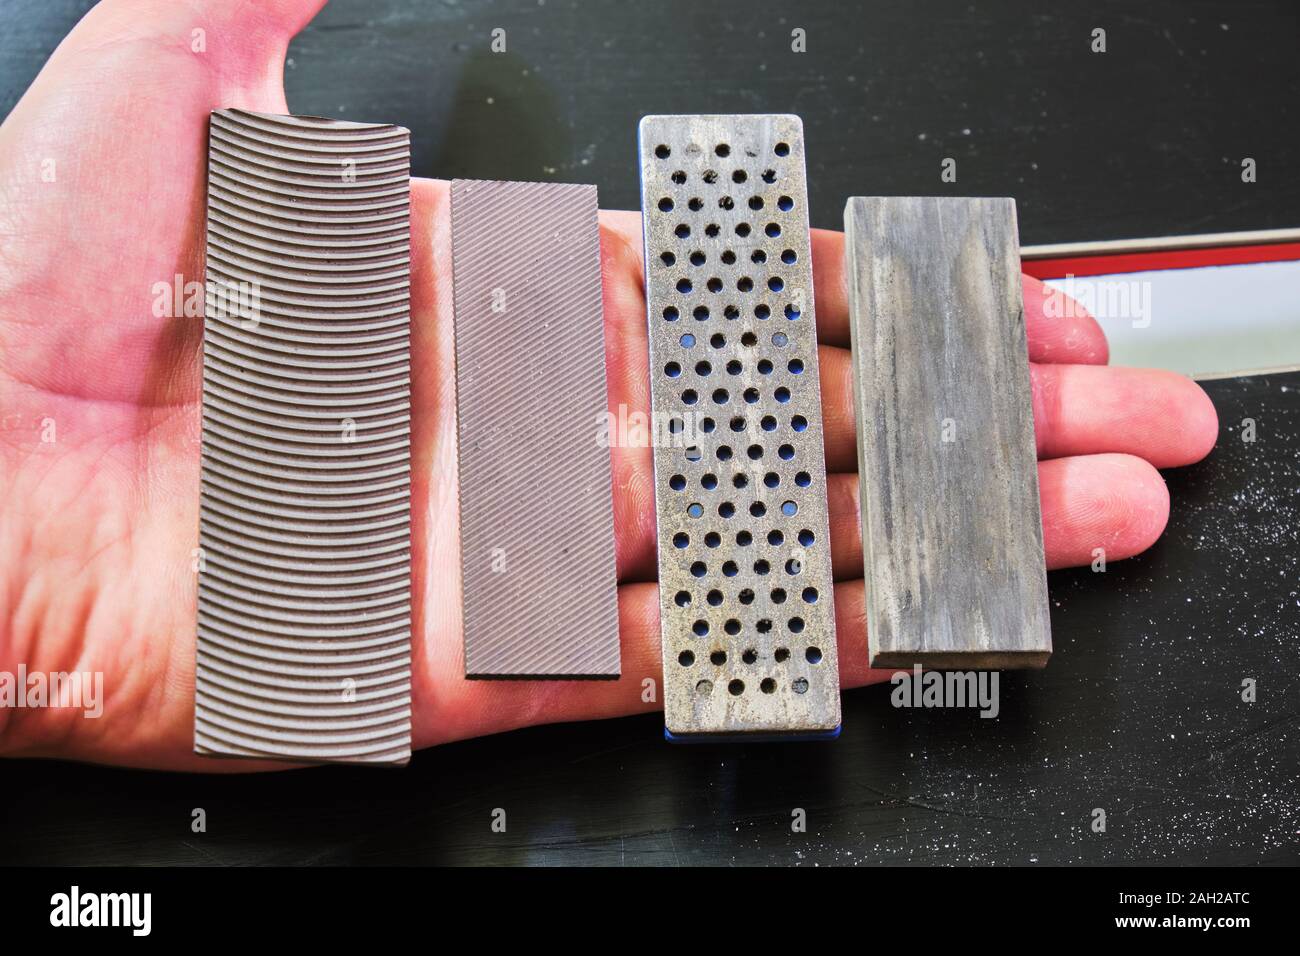 Ski tuning files and stones in a hand: panzar (panzer) file, mill file,  diamond stone, ceramic stone. These are used for ski and snowboard edge  tuning Stock Photo - Alamy